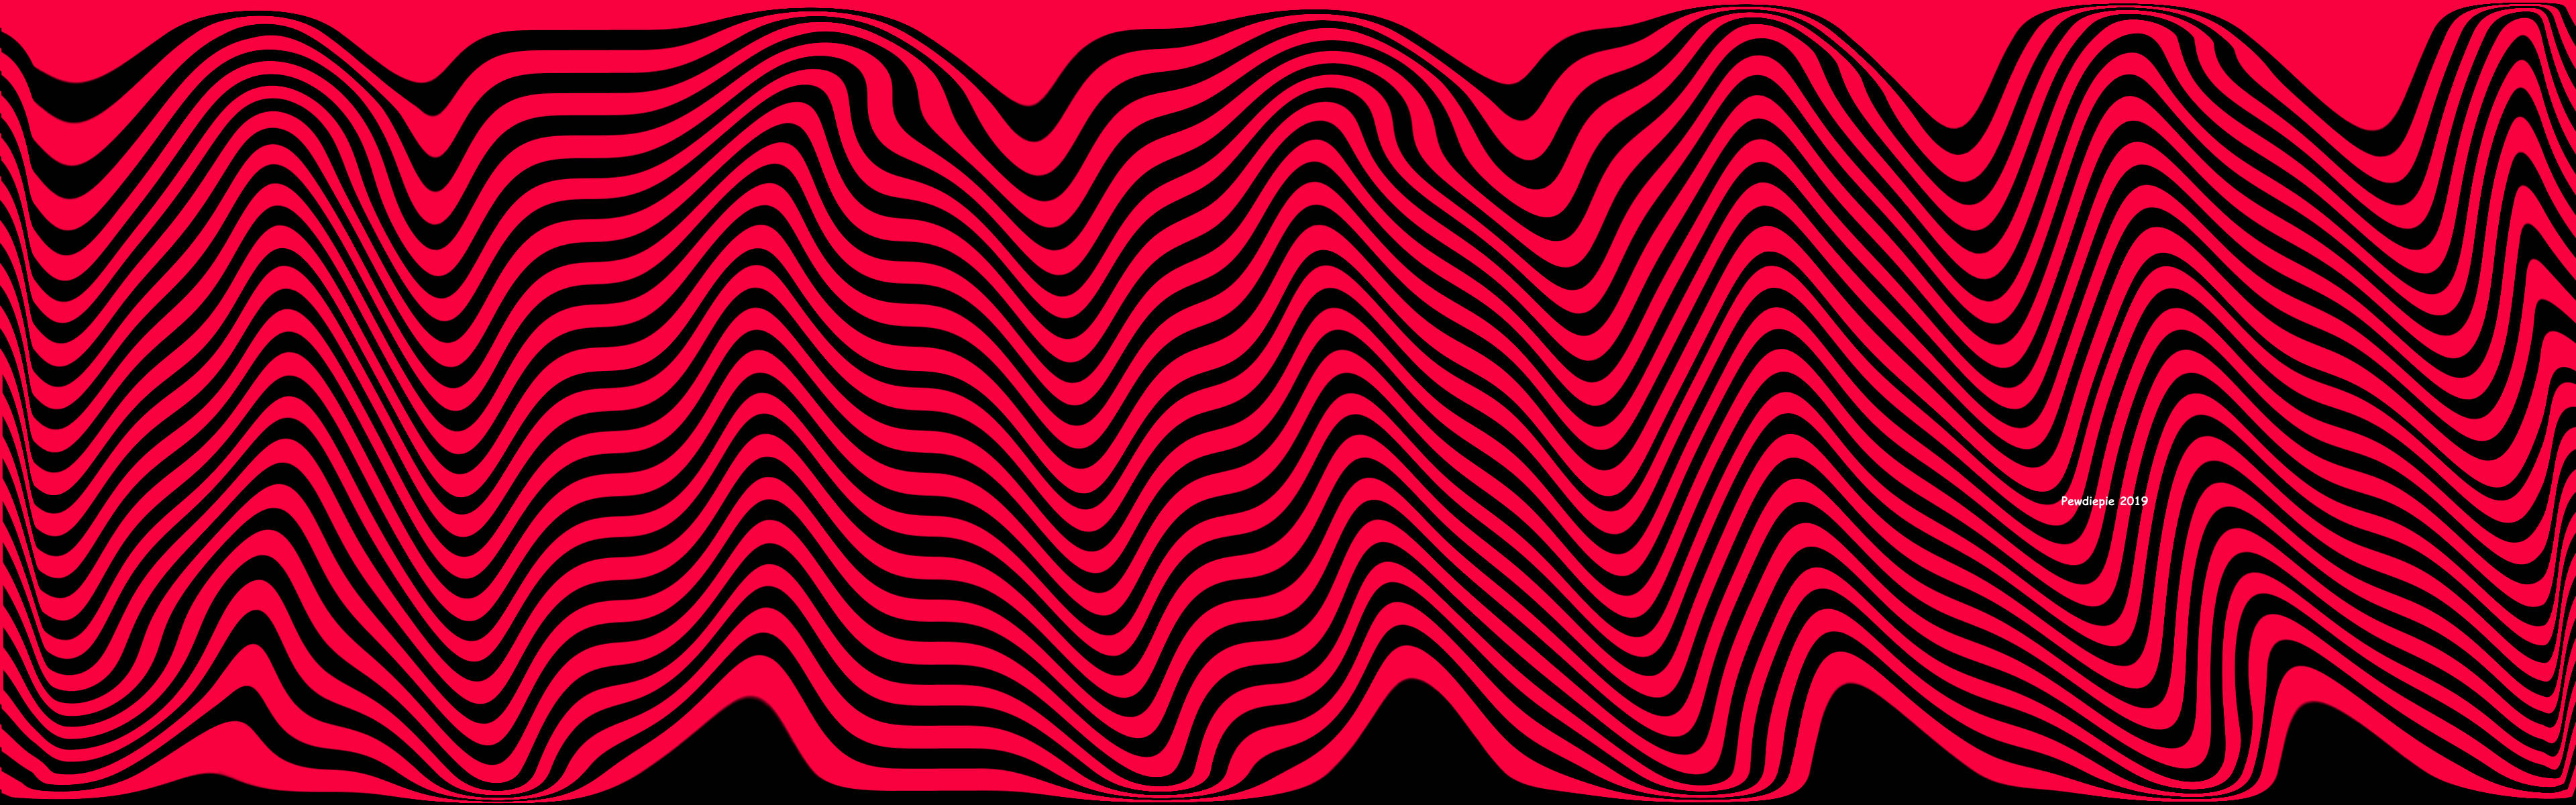 Pewdiepie's Unique Style On An Eye-catching Pink Background